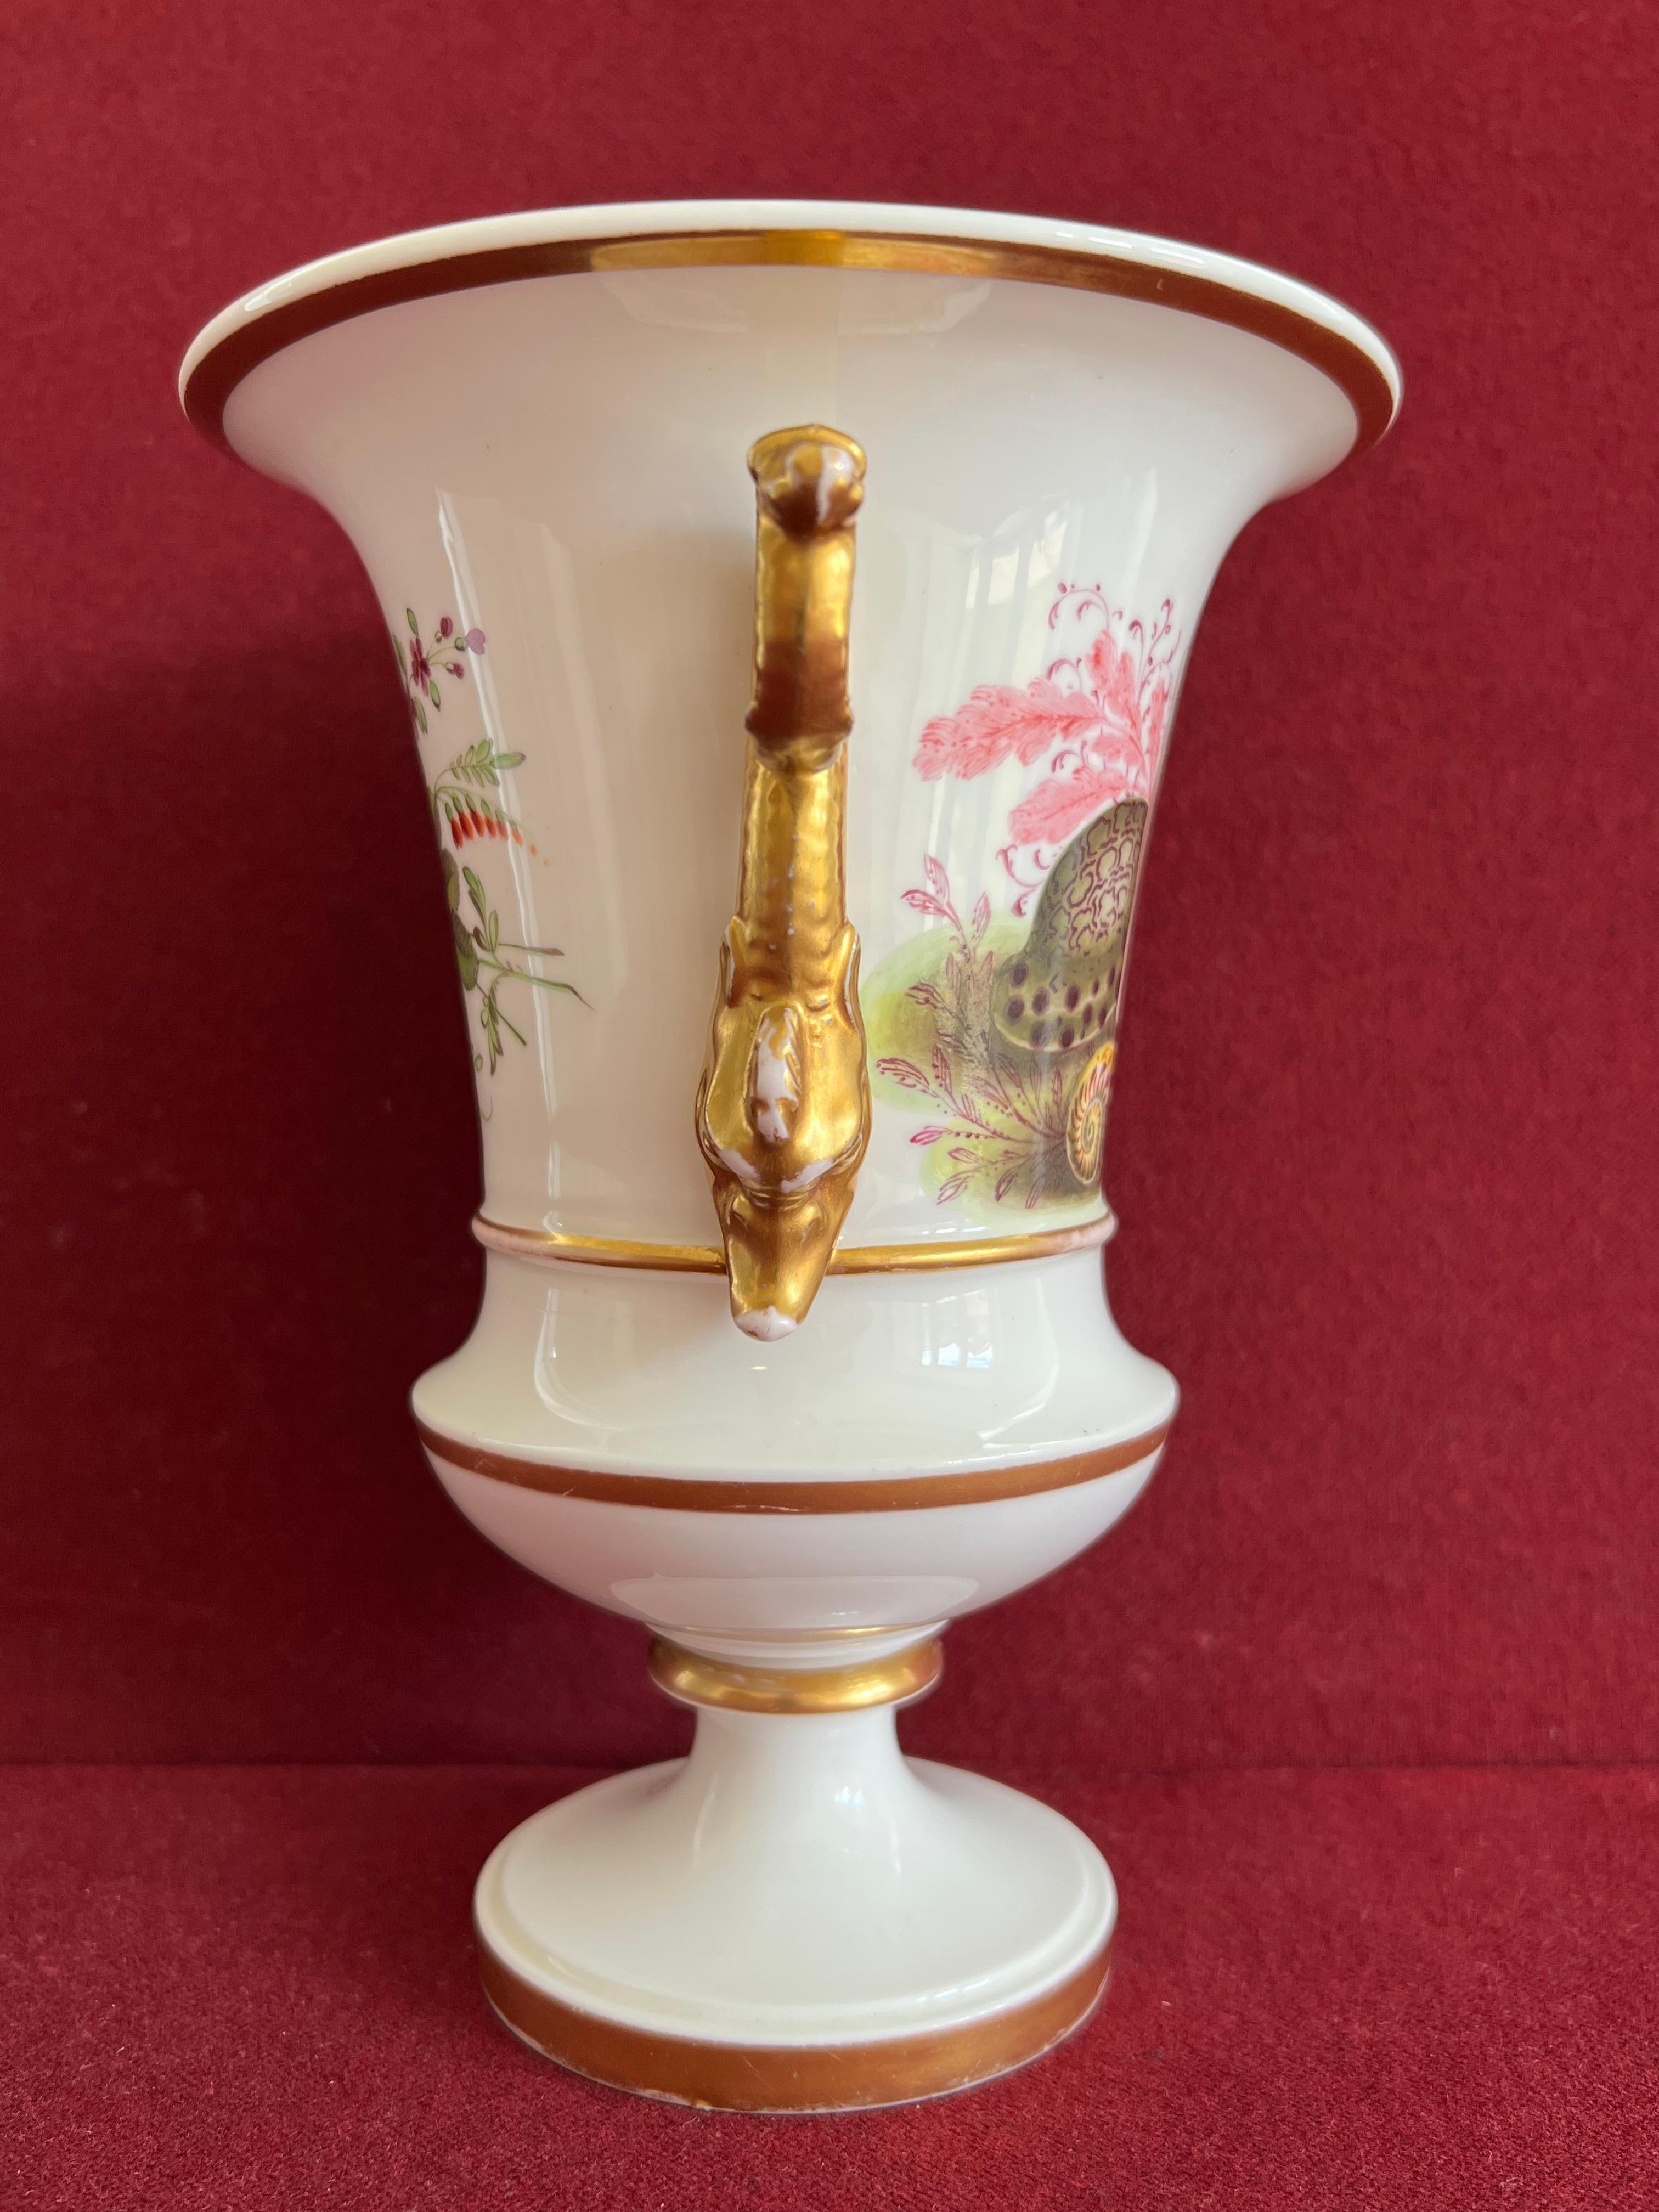 Hand-Painted Rare Spode Porcelain Shell Decorated Vase Pattern 3930 C.1824 For Sale